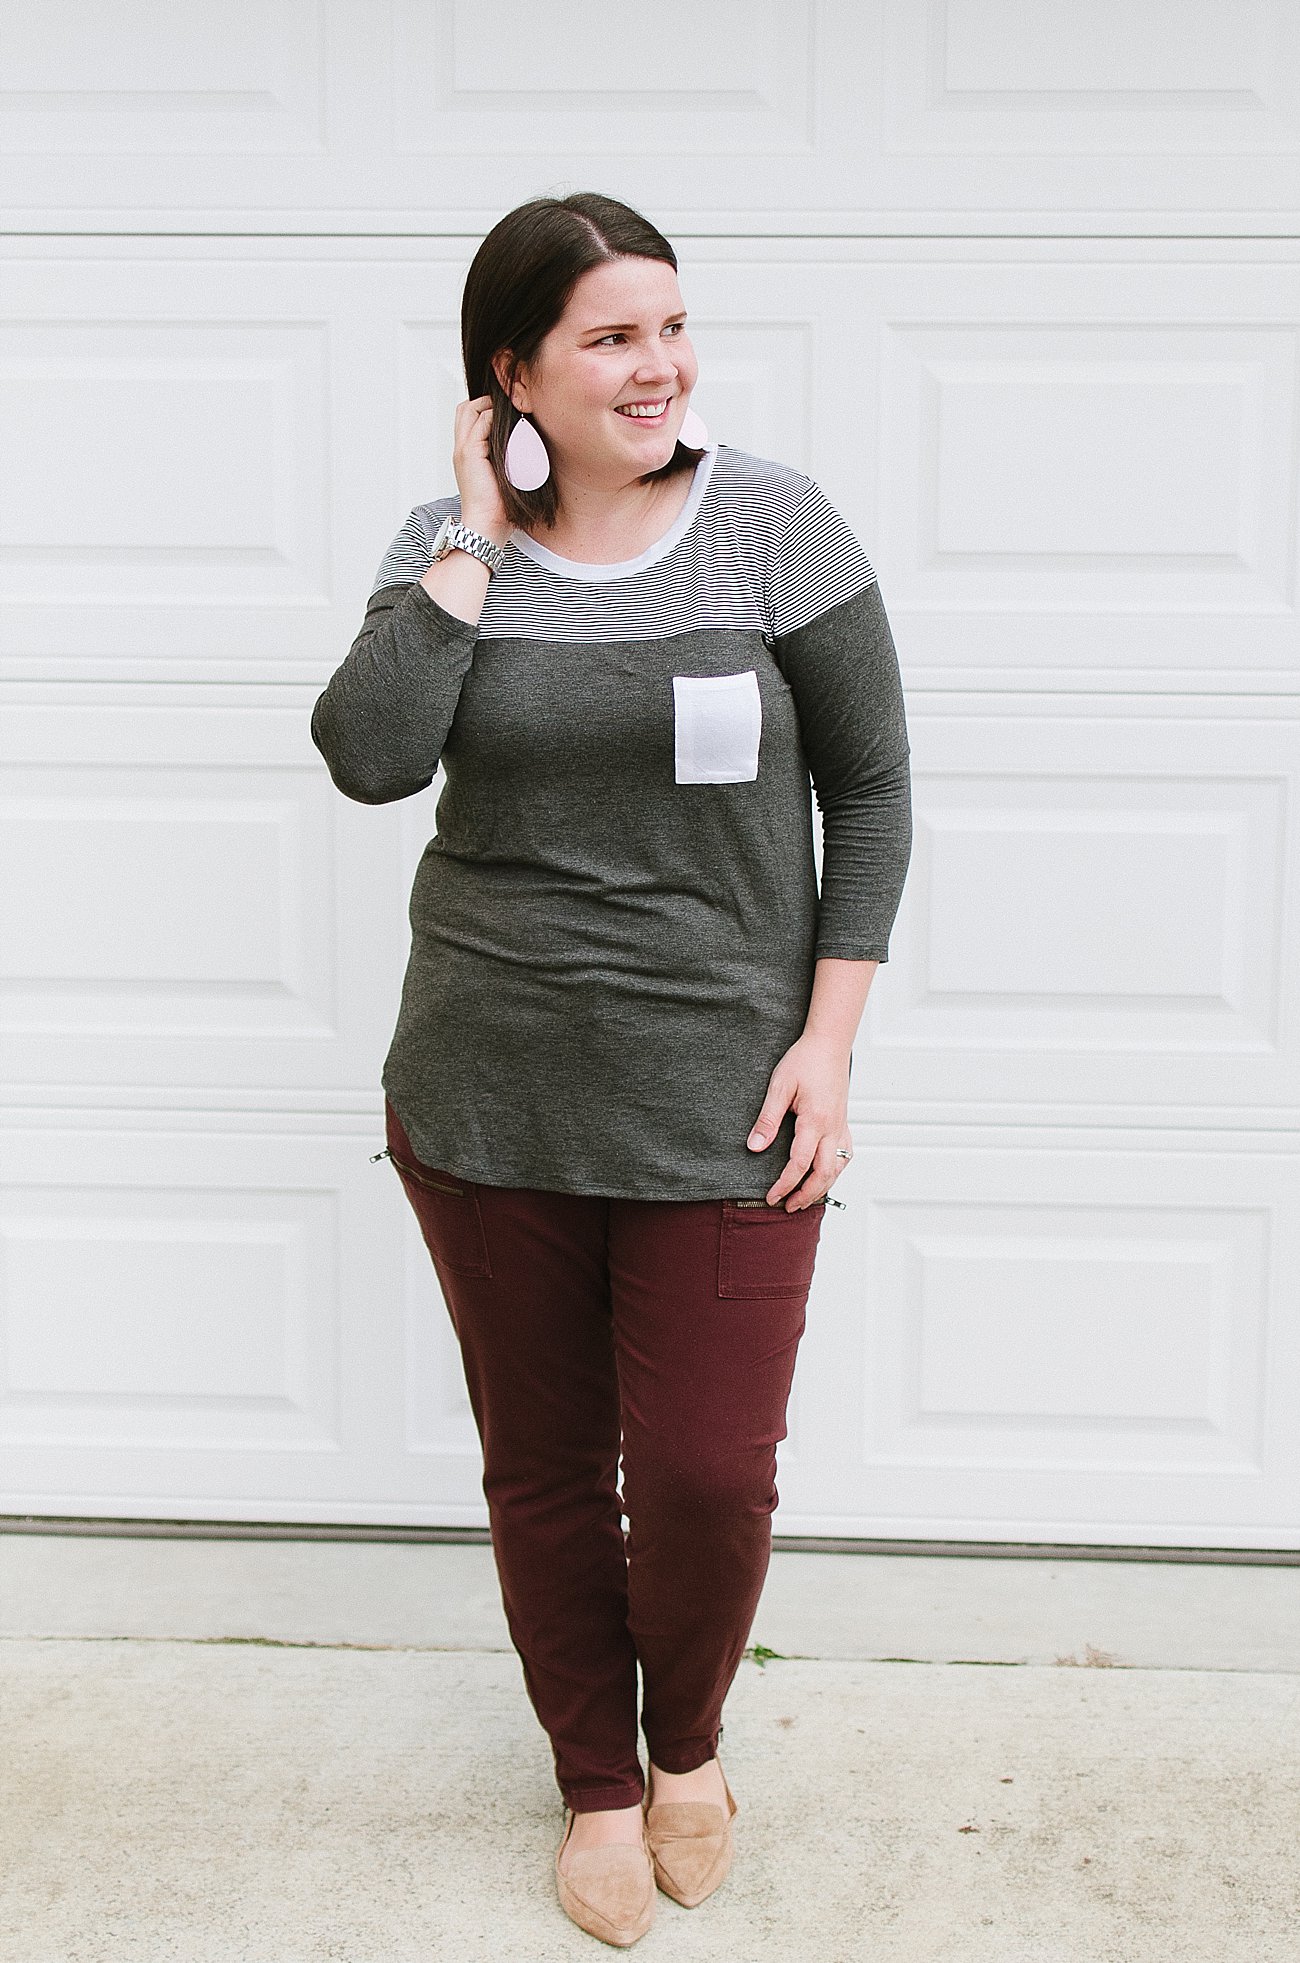 Stitch Fix Review #33 - Loveappella "Edgewater Knit Top" - Size XL and Kut from the Kloth "Theresa Zipper Detail Cargo Skinny Pant" - Size 14